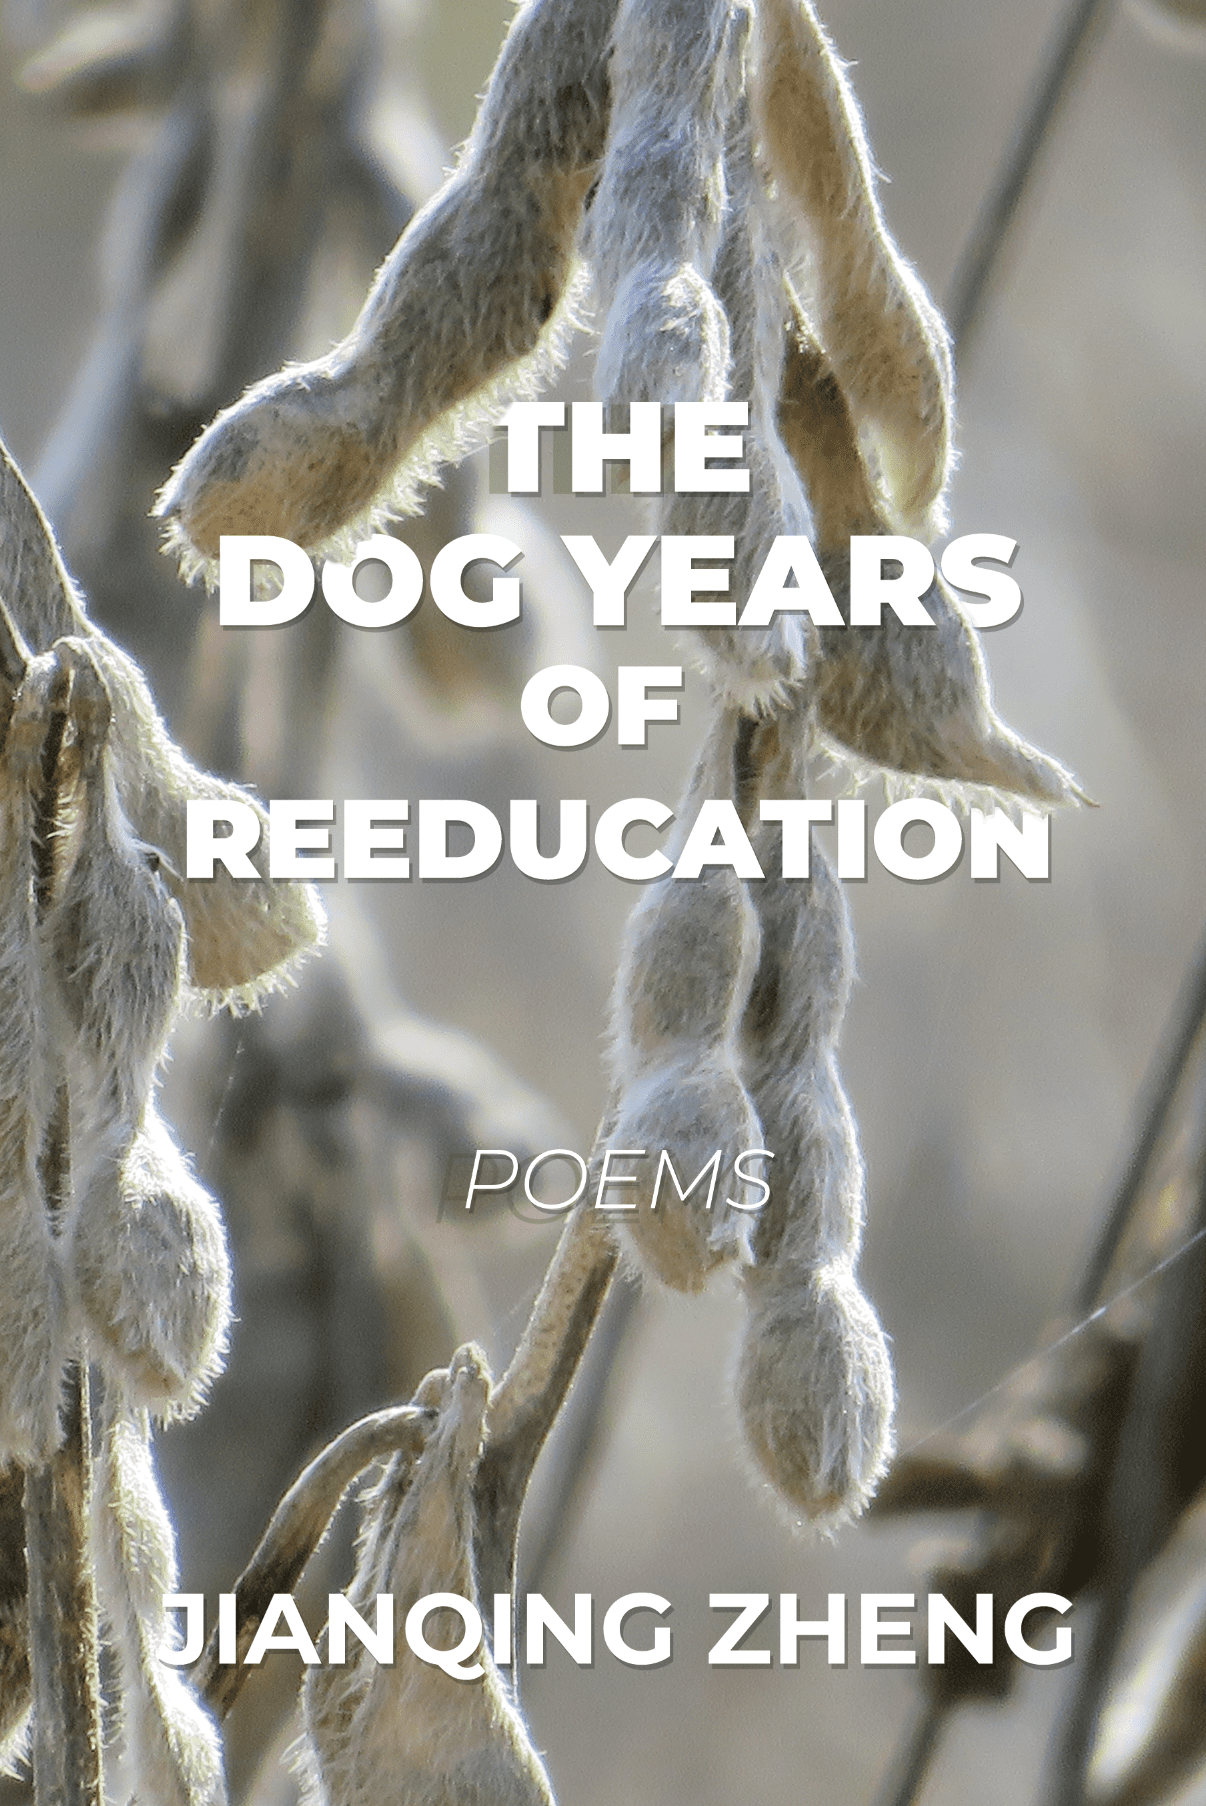 The Dog Years of Reeducation, Poems by Jianqing Zheng. White text is superimposed over monotone beige soybeans in the field with a dramatic blurred depth of field.